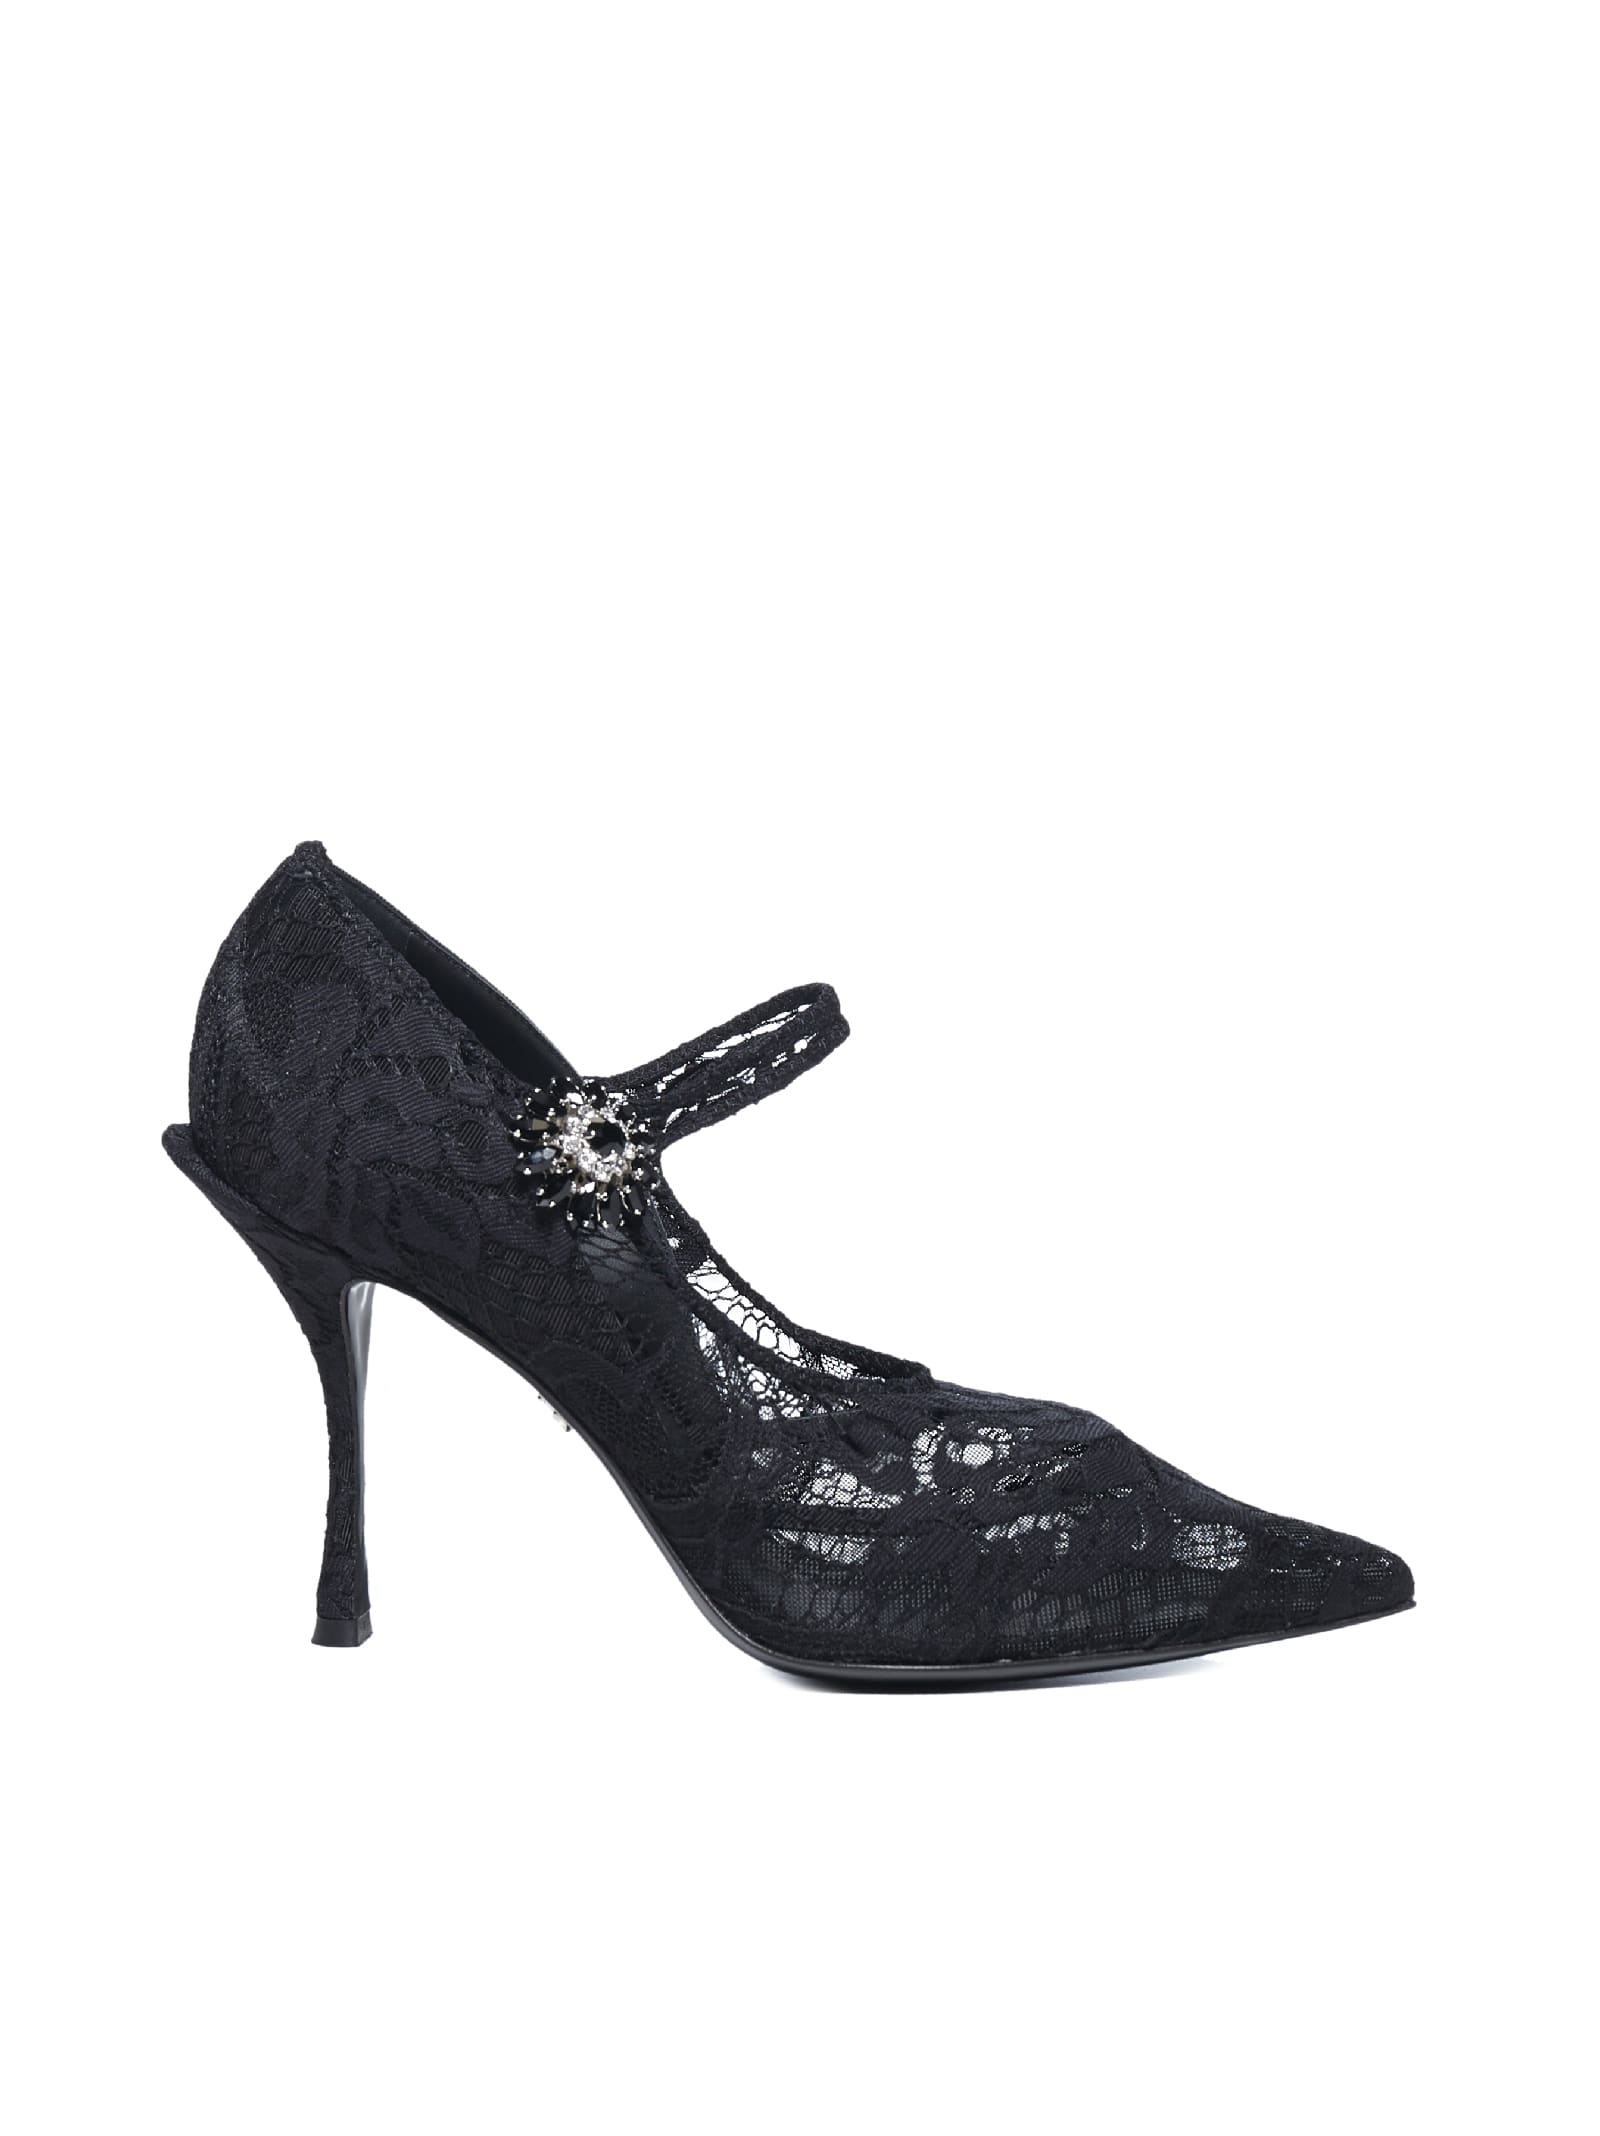 Buy Dolce & Gabbana Lori Lace Mary Jane online, shop Dolce & Gabbana shoes with free shipping